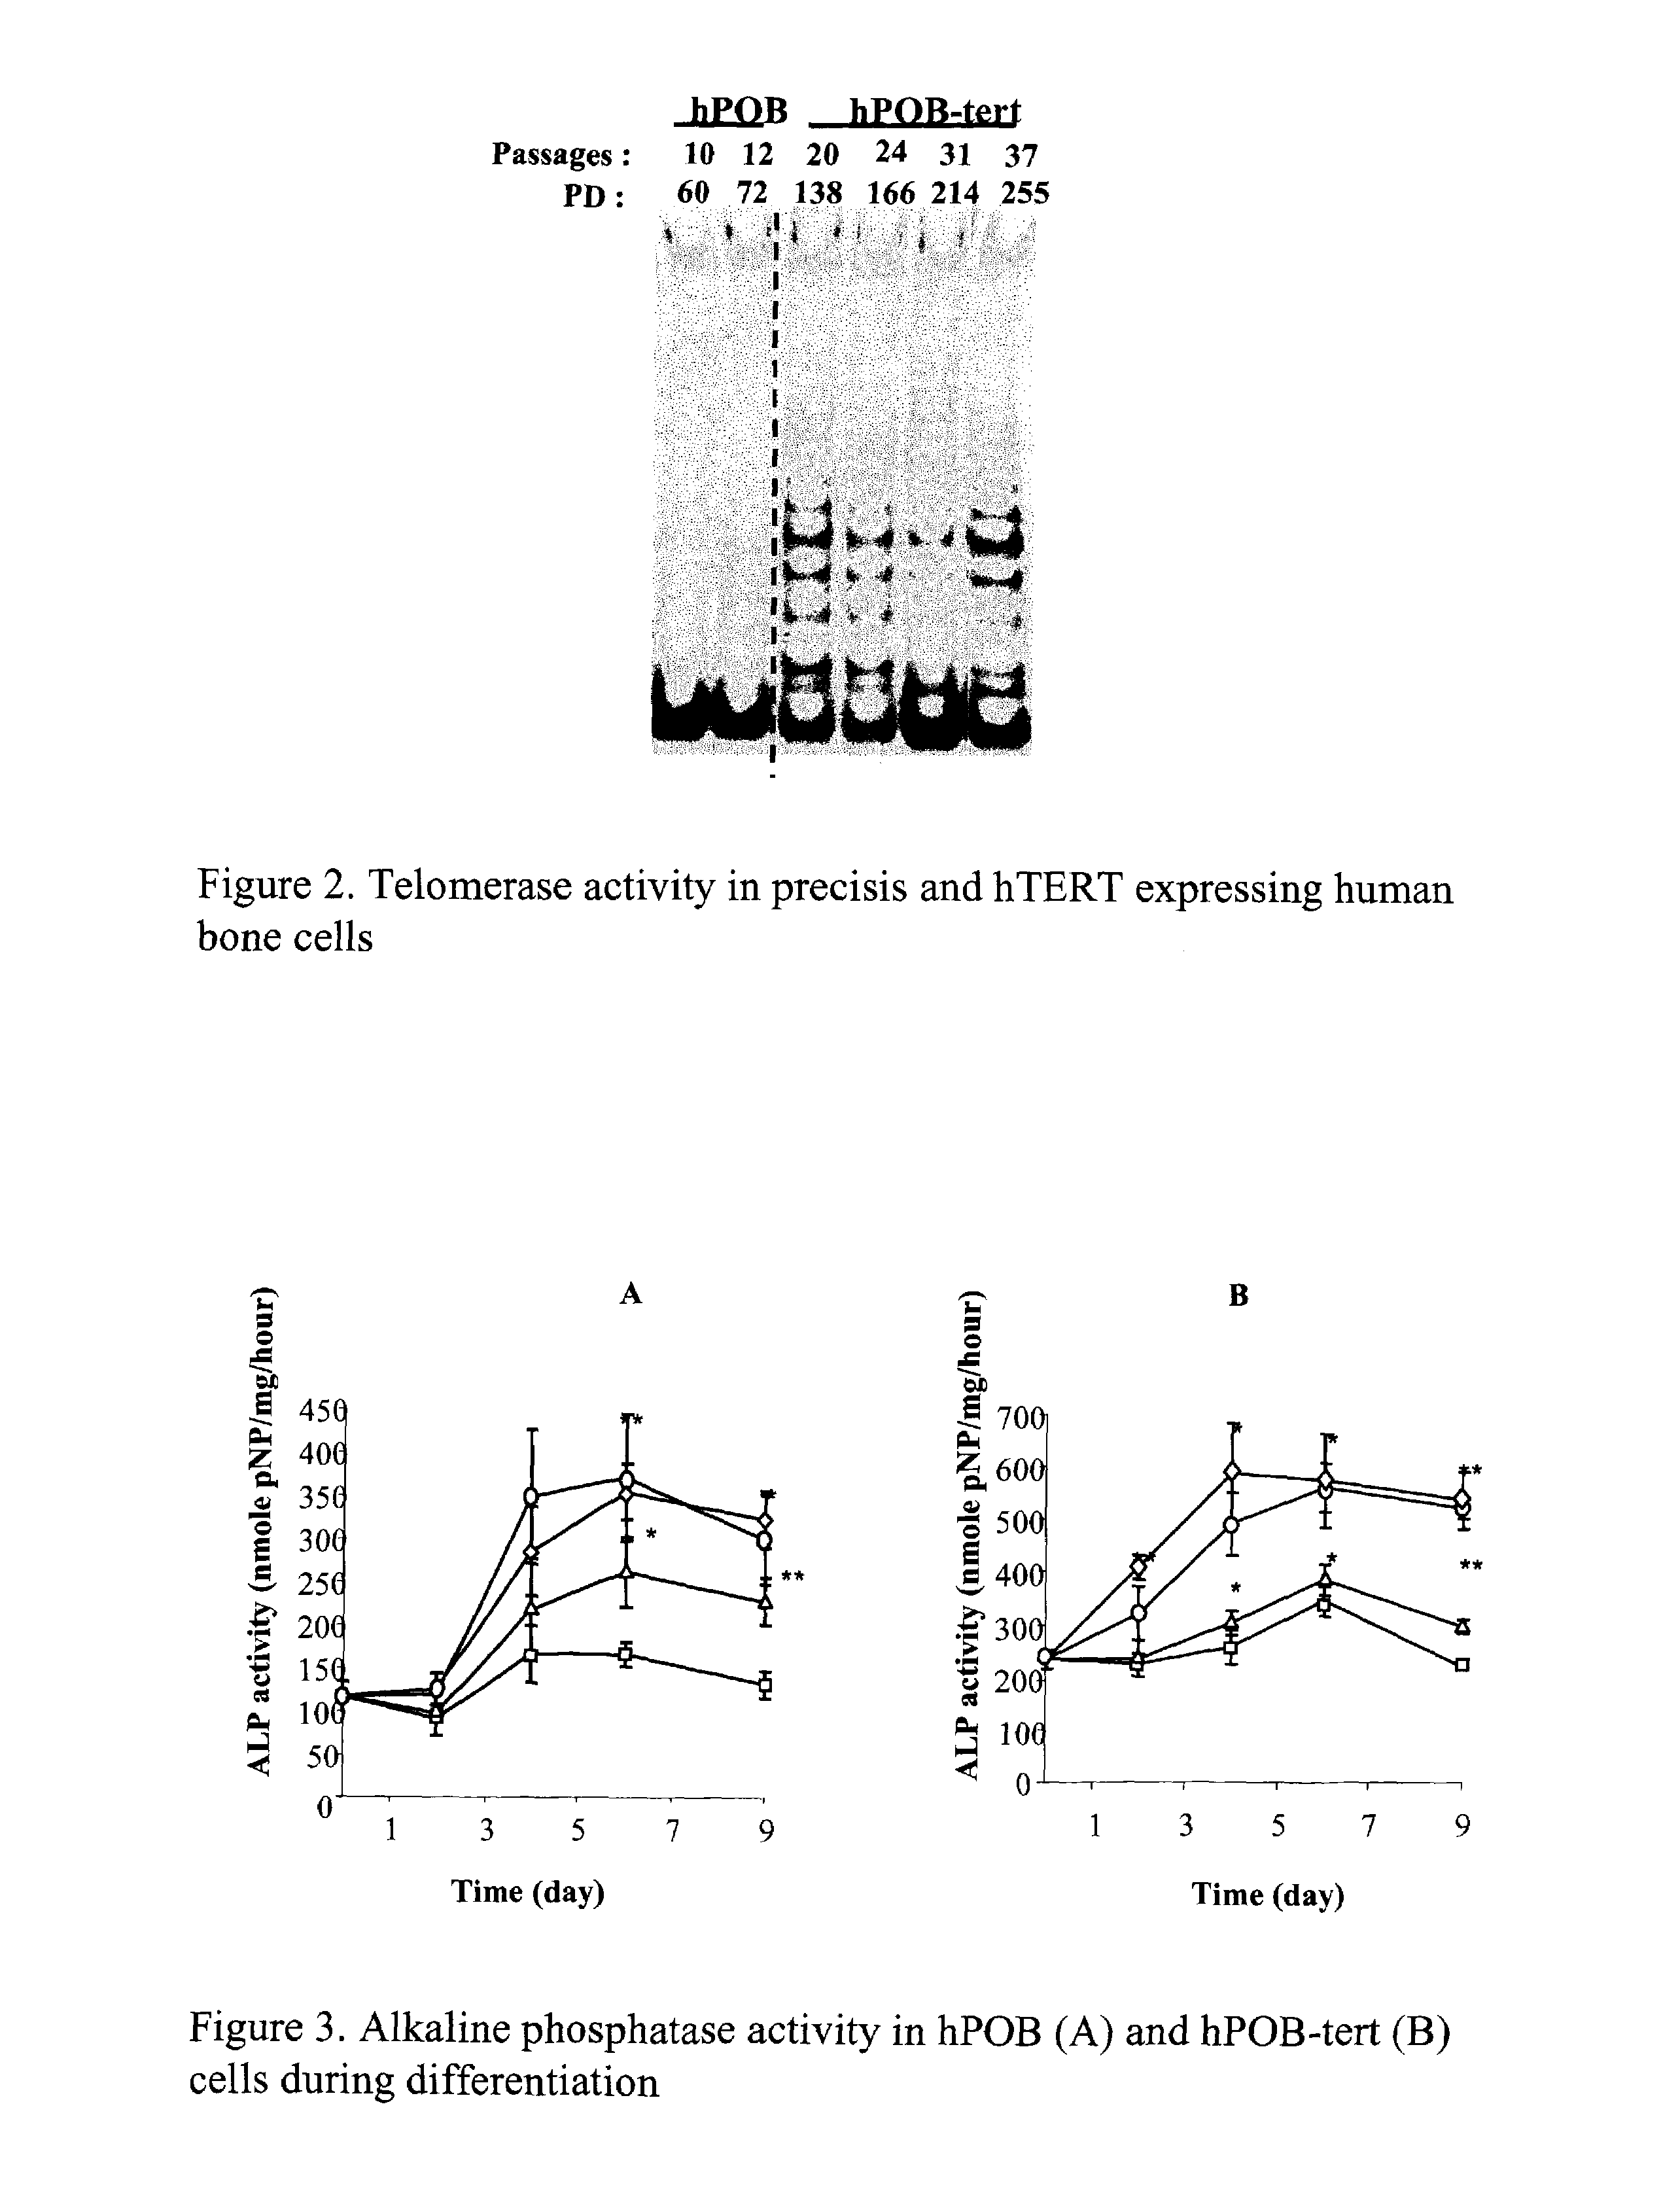 Immortalized preosteoblasts and method for their production